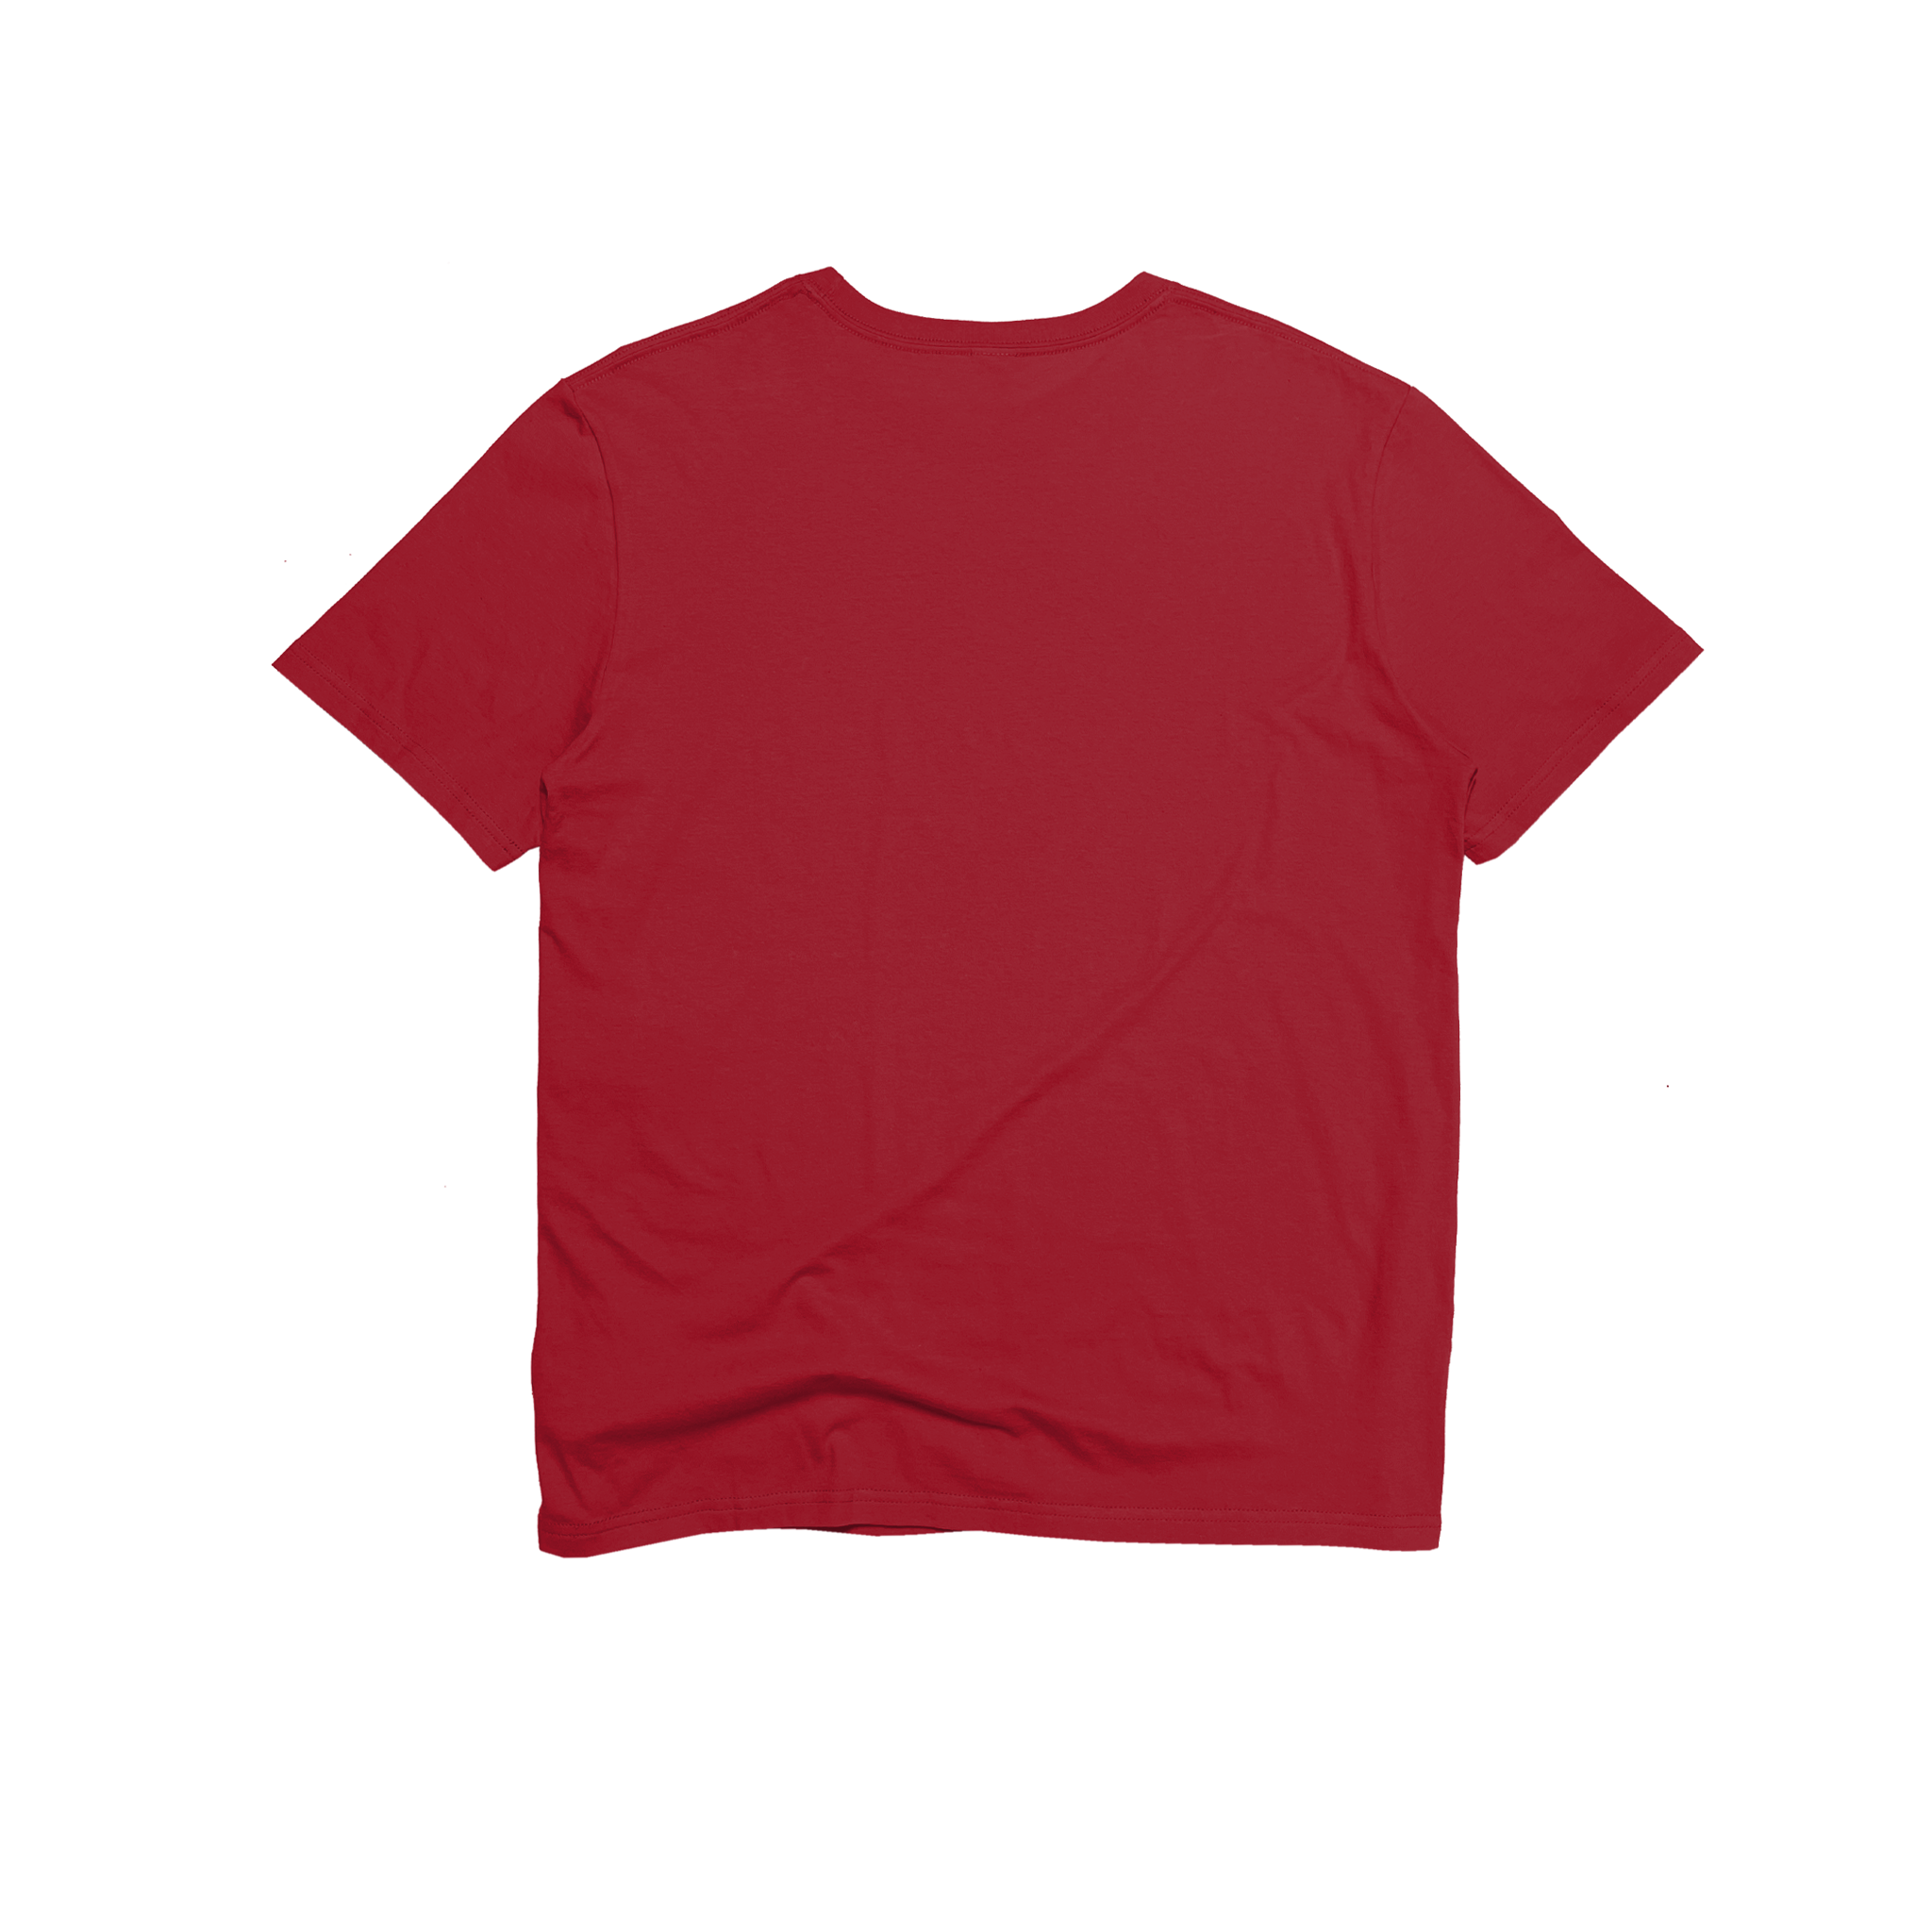 Back Flat Lay of GOEX Unisex and Men's Cotton Tee in Cardinal